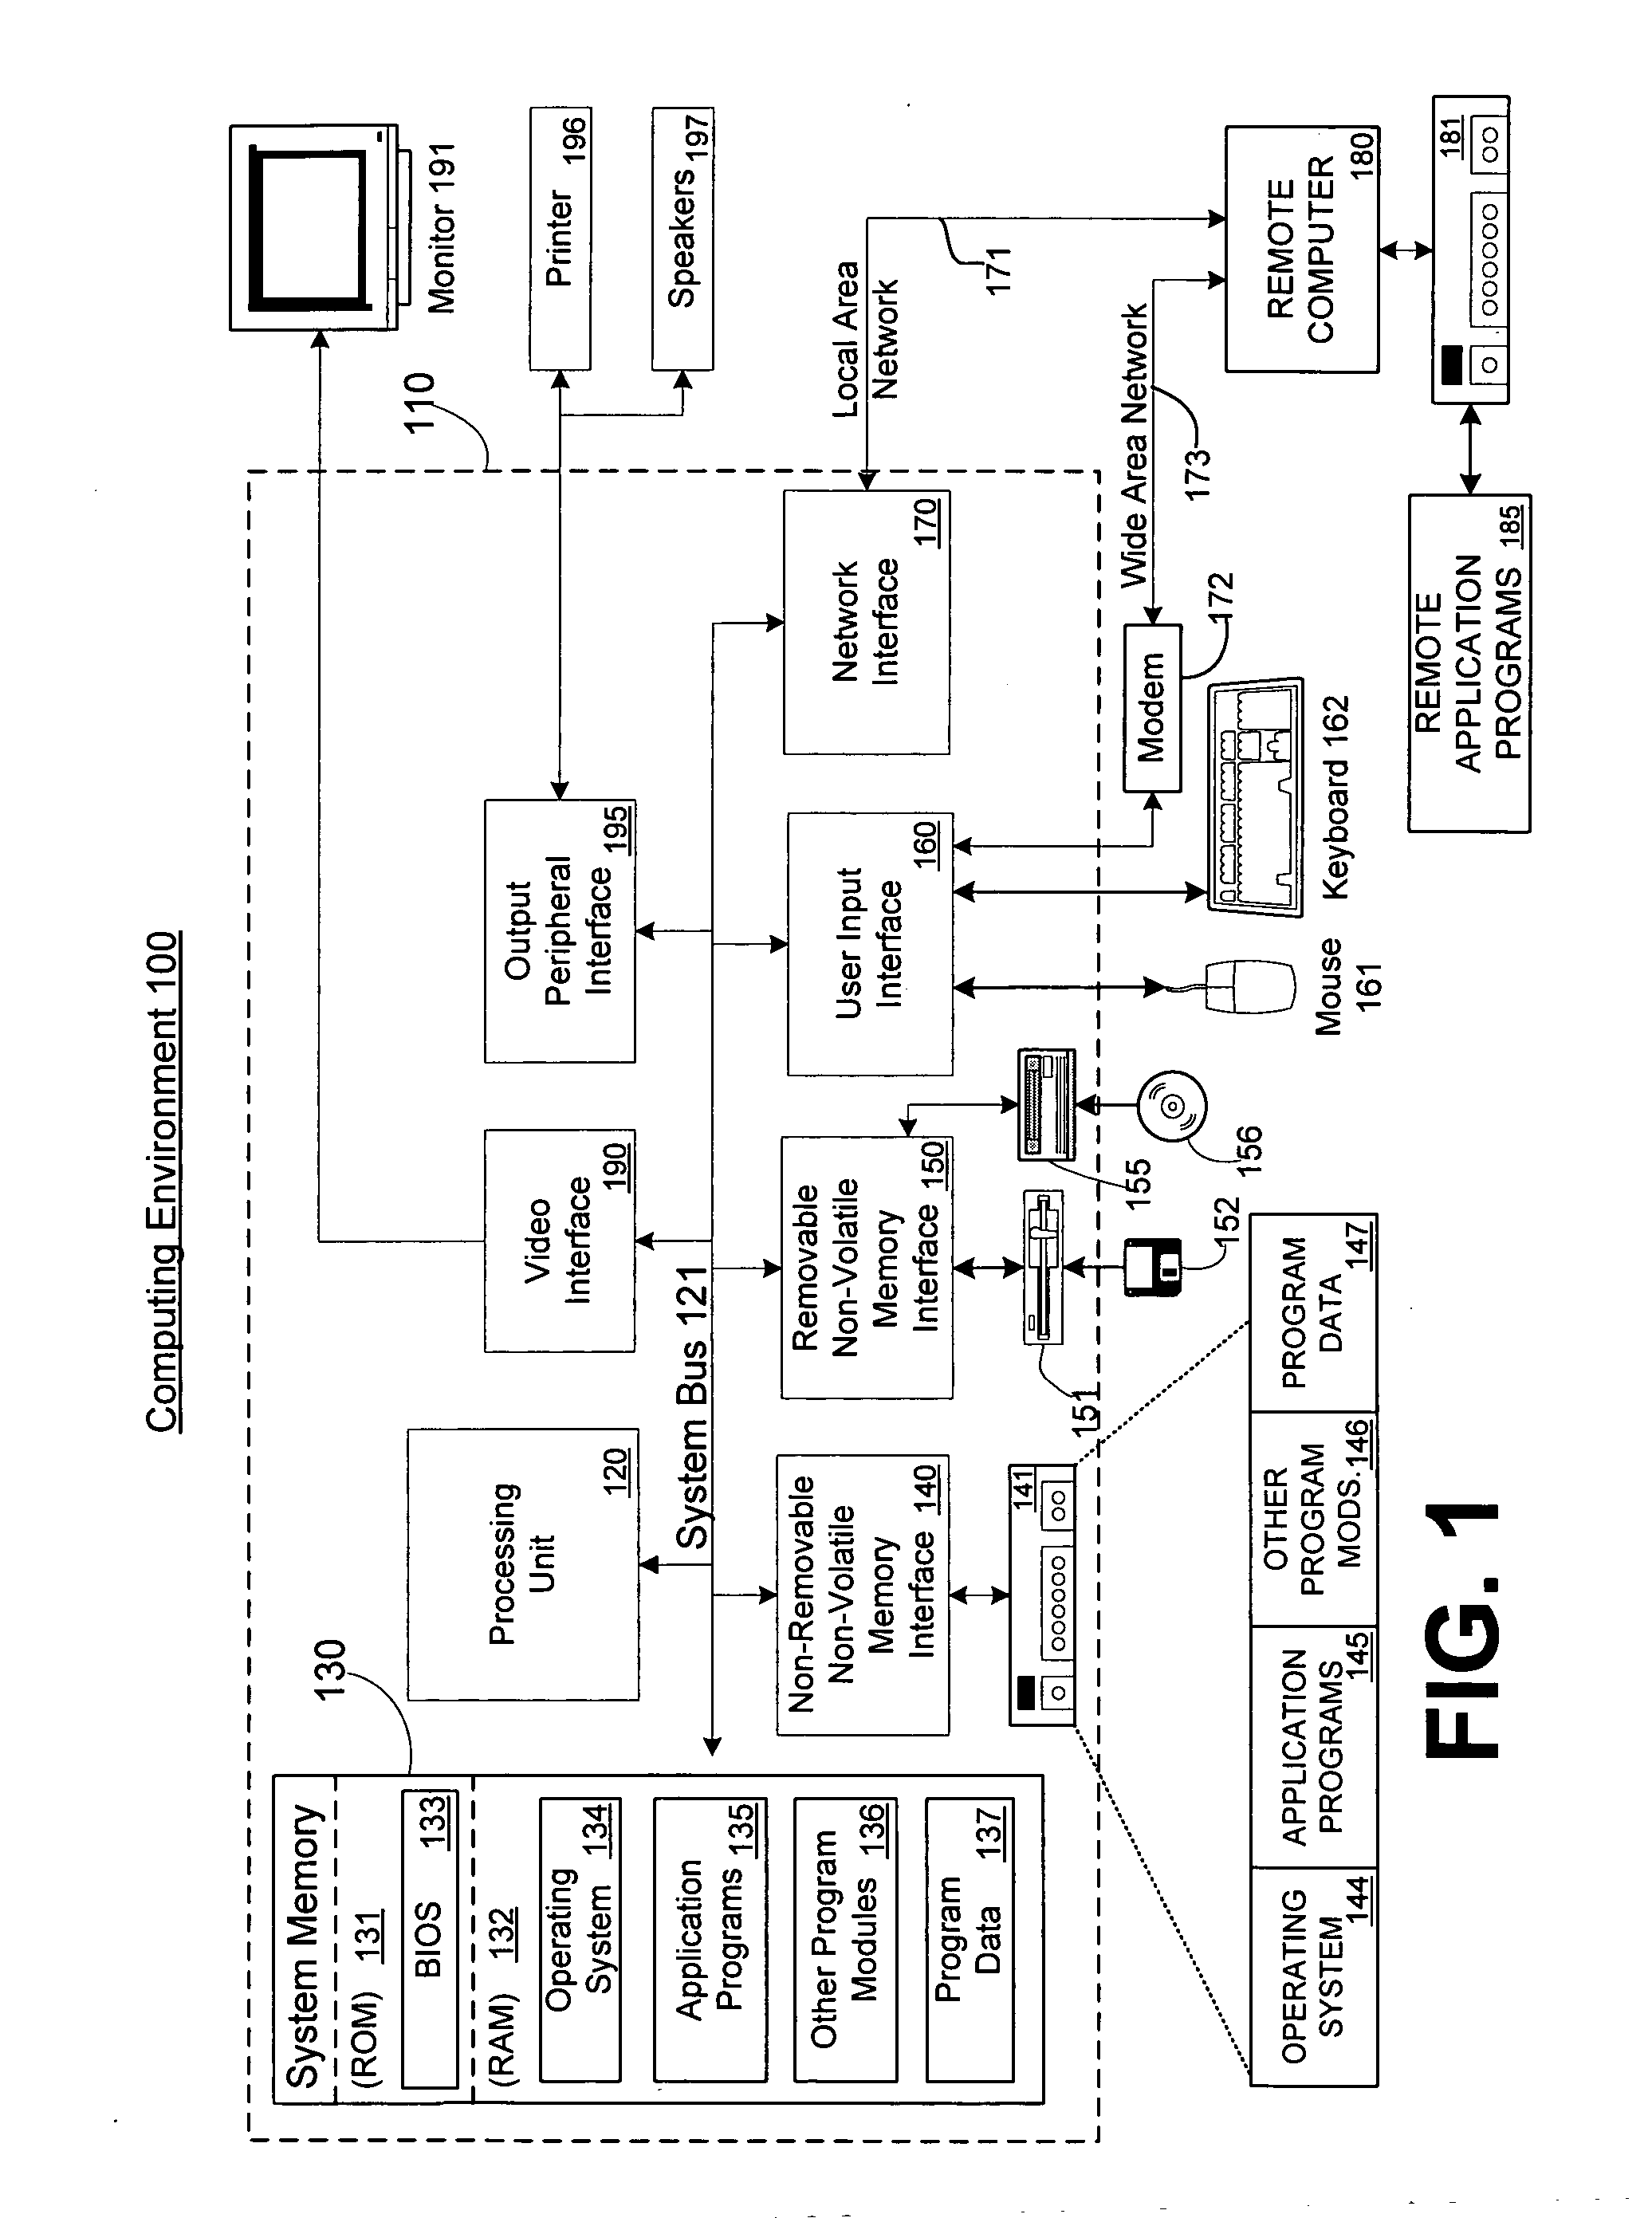 System and methods for processing software authorization and error feedback